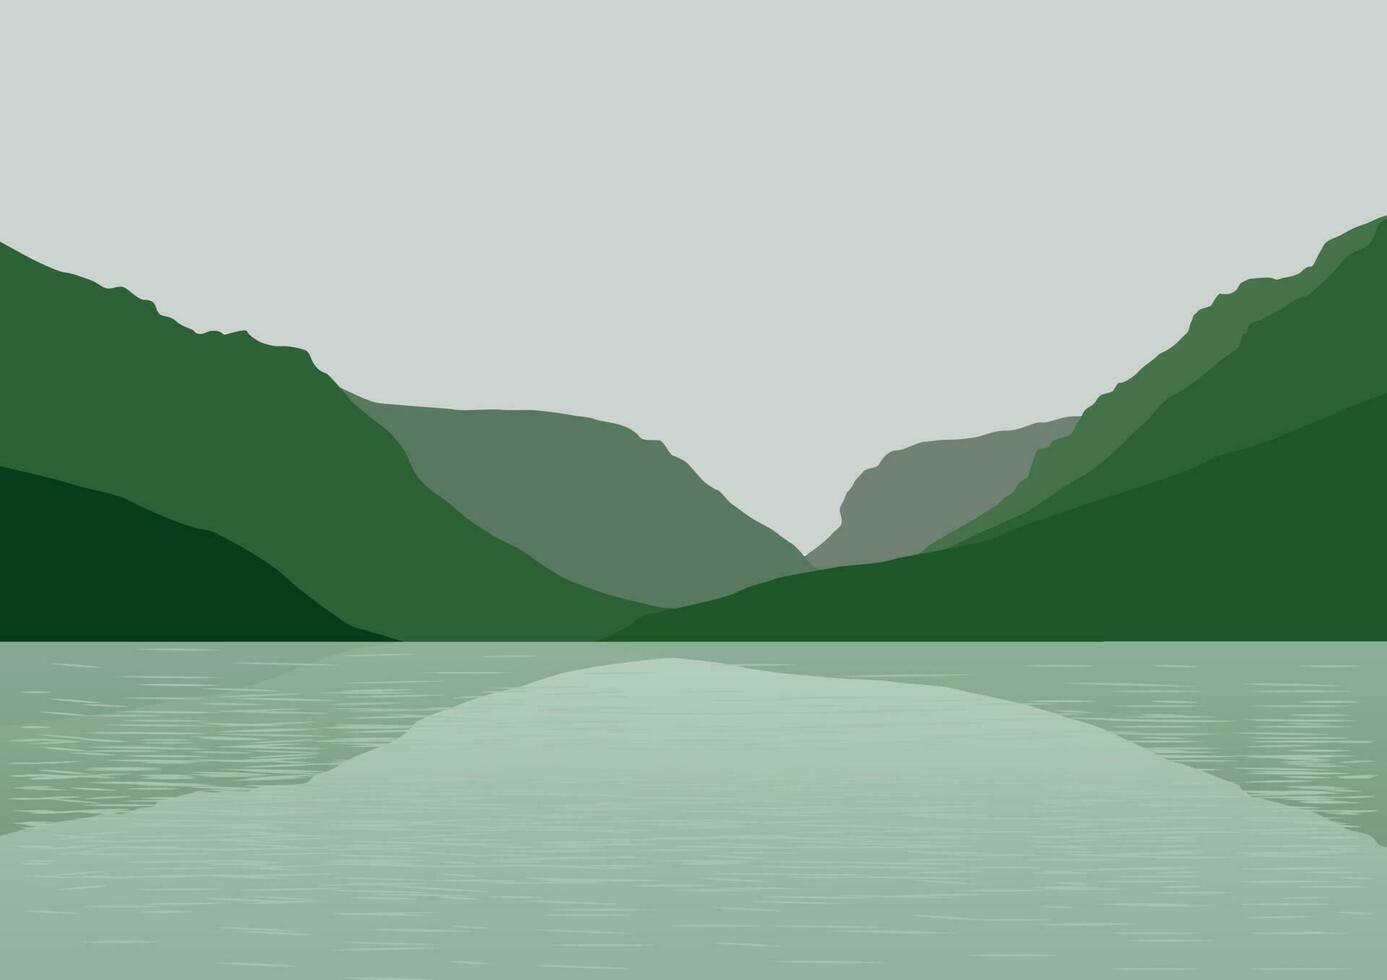 beautiful lake and mountains vector illustration design